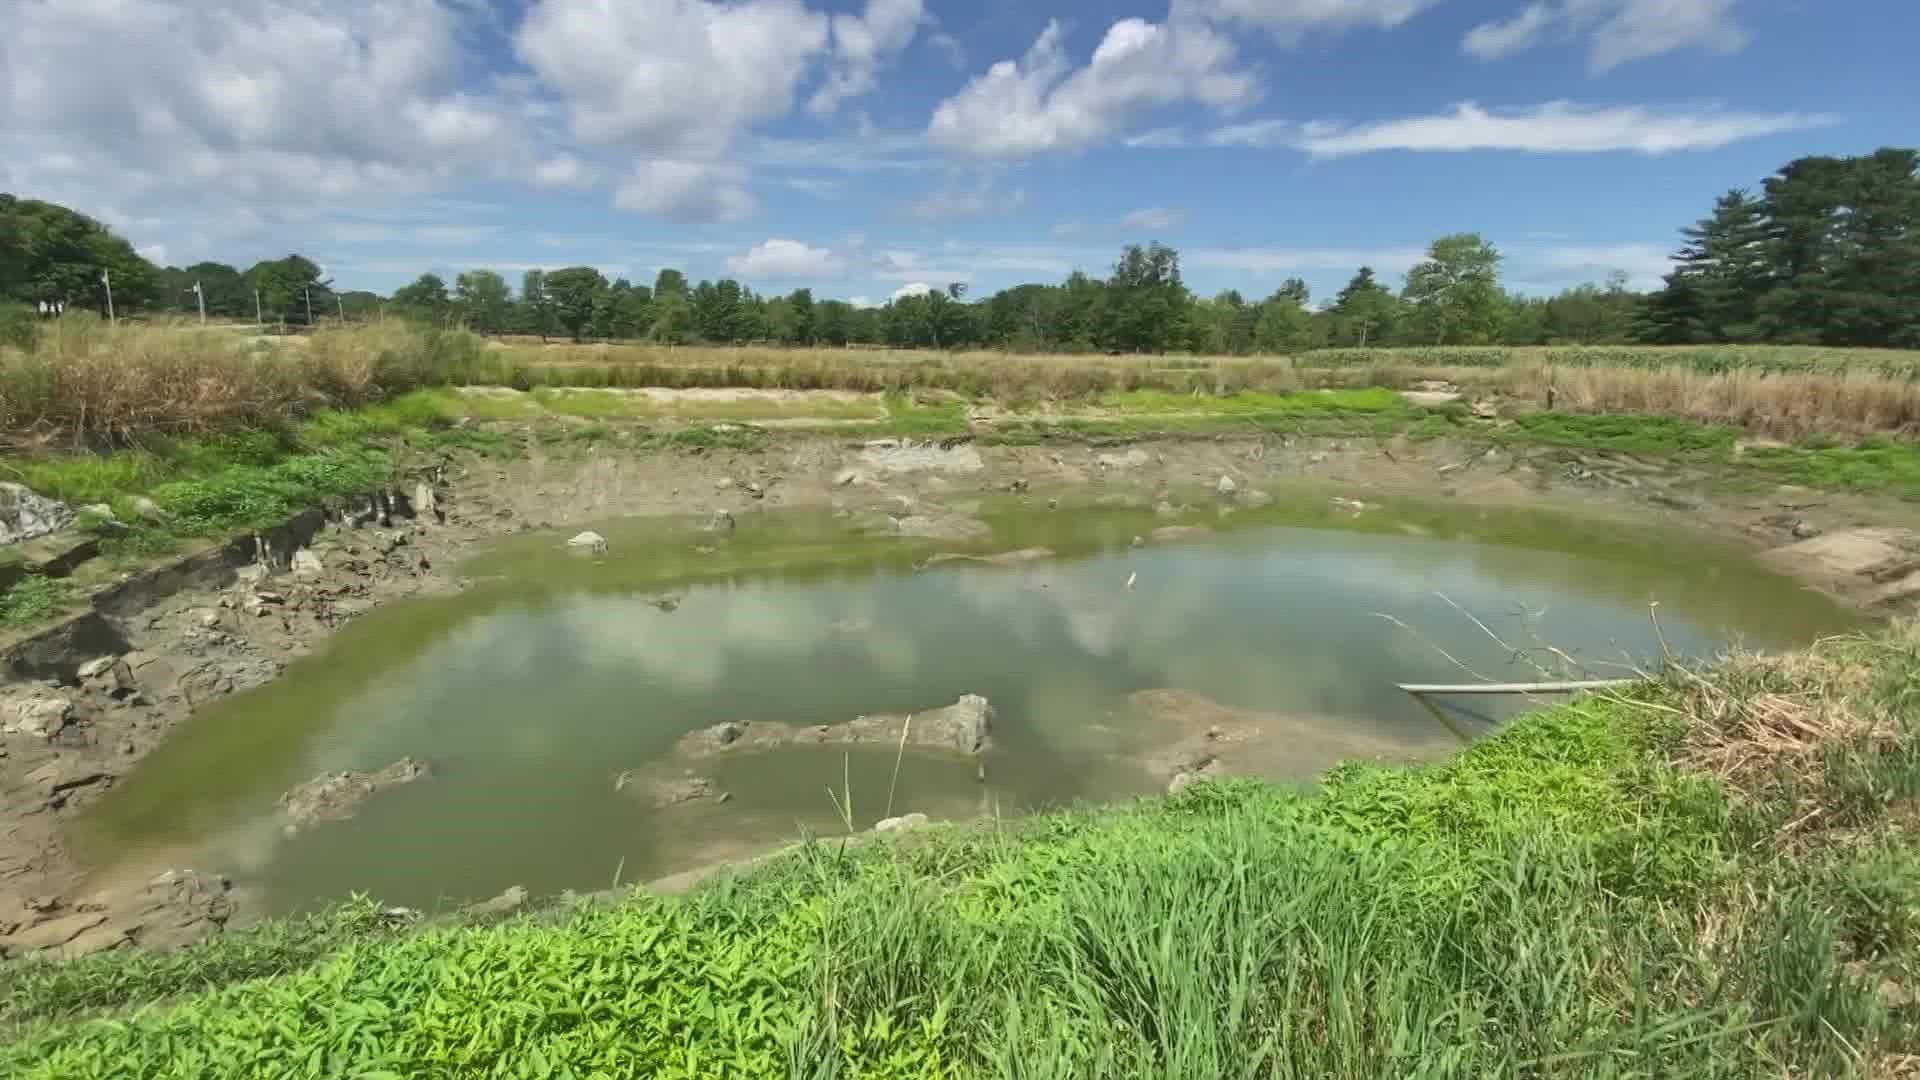 The water level for Leary Farm in Saco is so low that employees say they may have to pick and chose which crops get enough water.